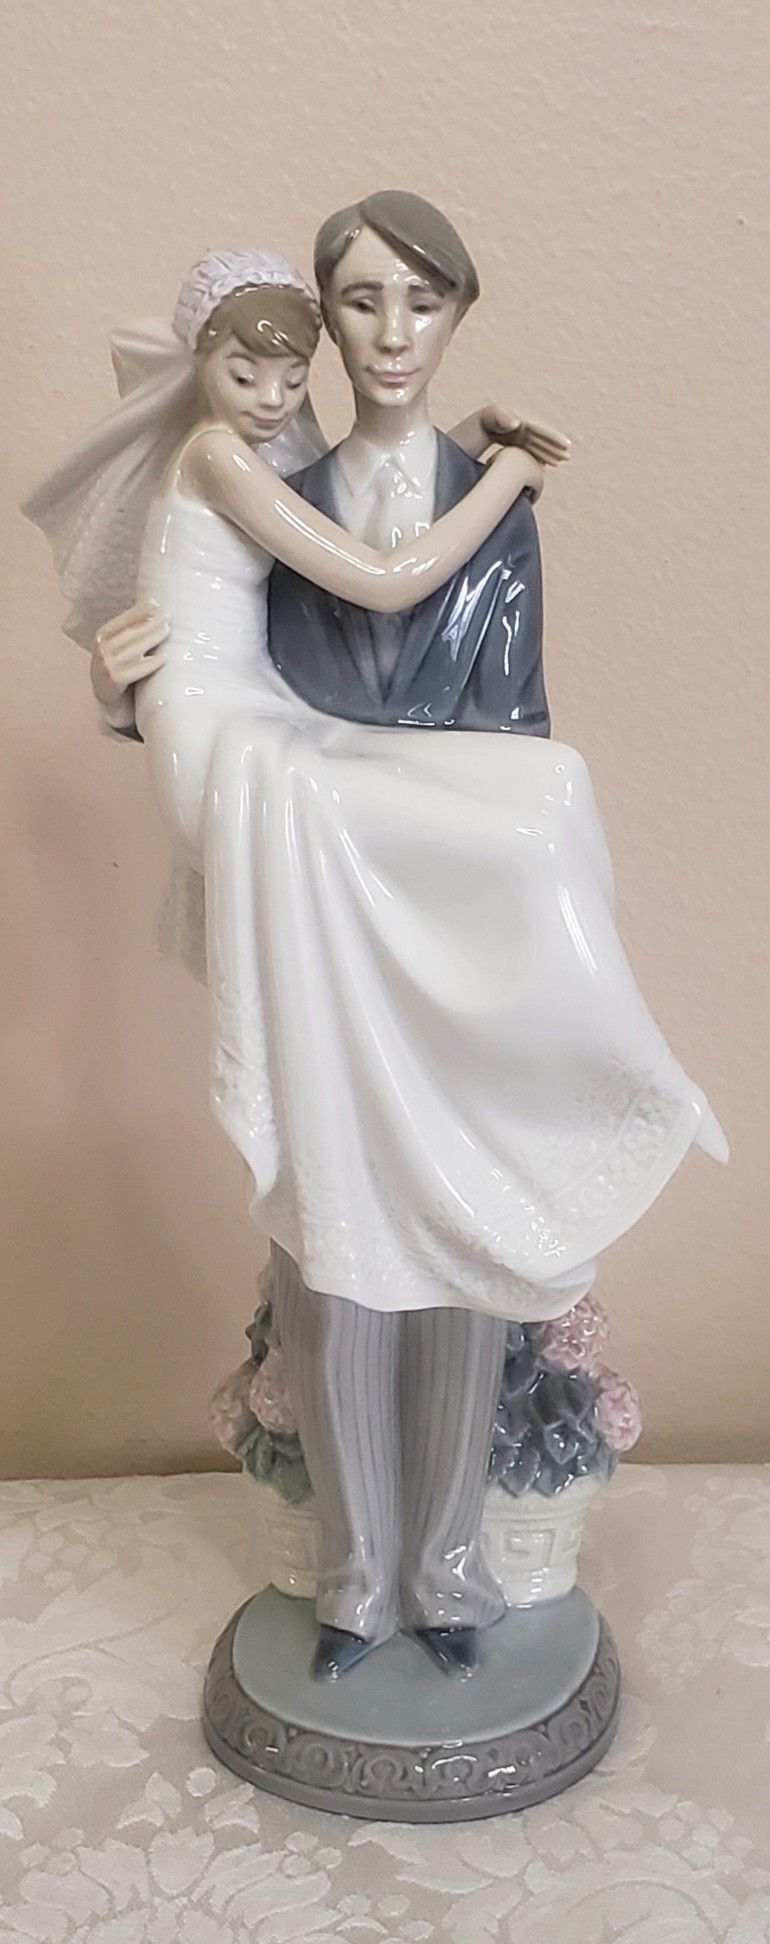 Lladro 1985 "Over The Threshold" Figurine (No Box) ●Price Is Firm; See below for more details●